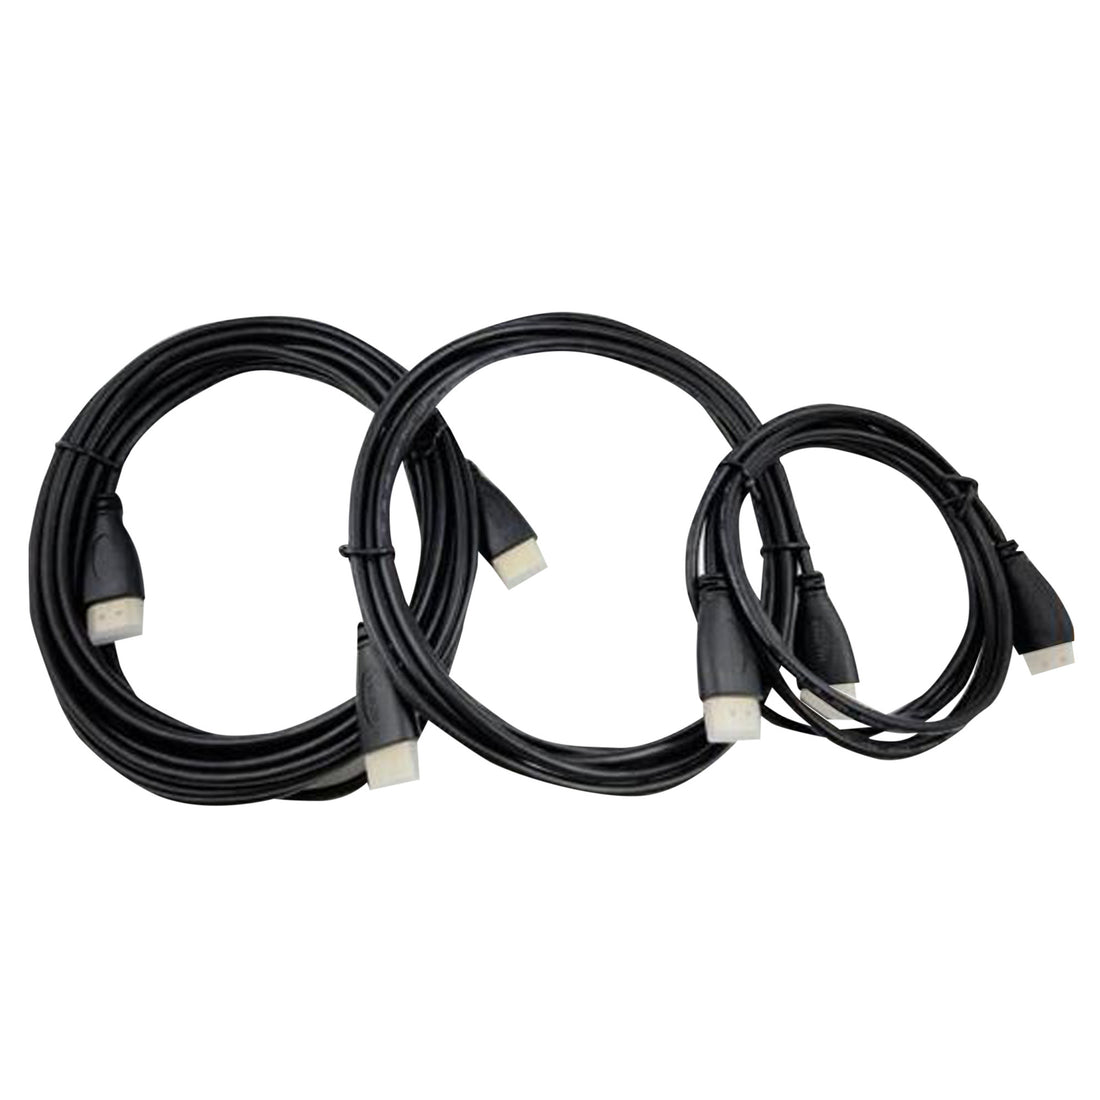 HDMI Cable - 5, 10 or 16 feet